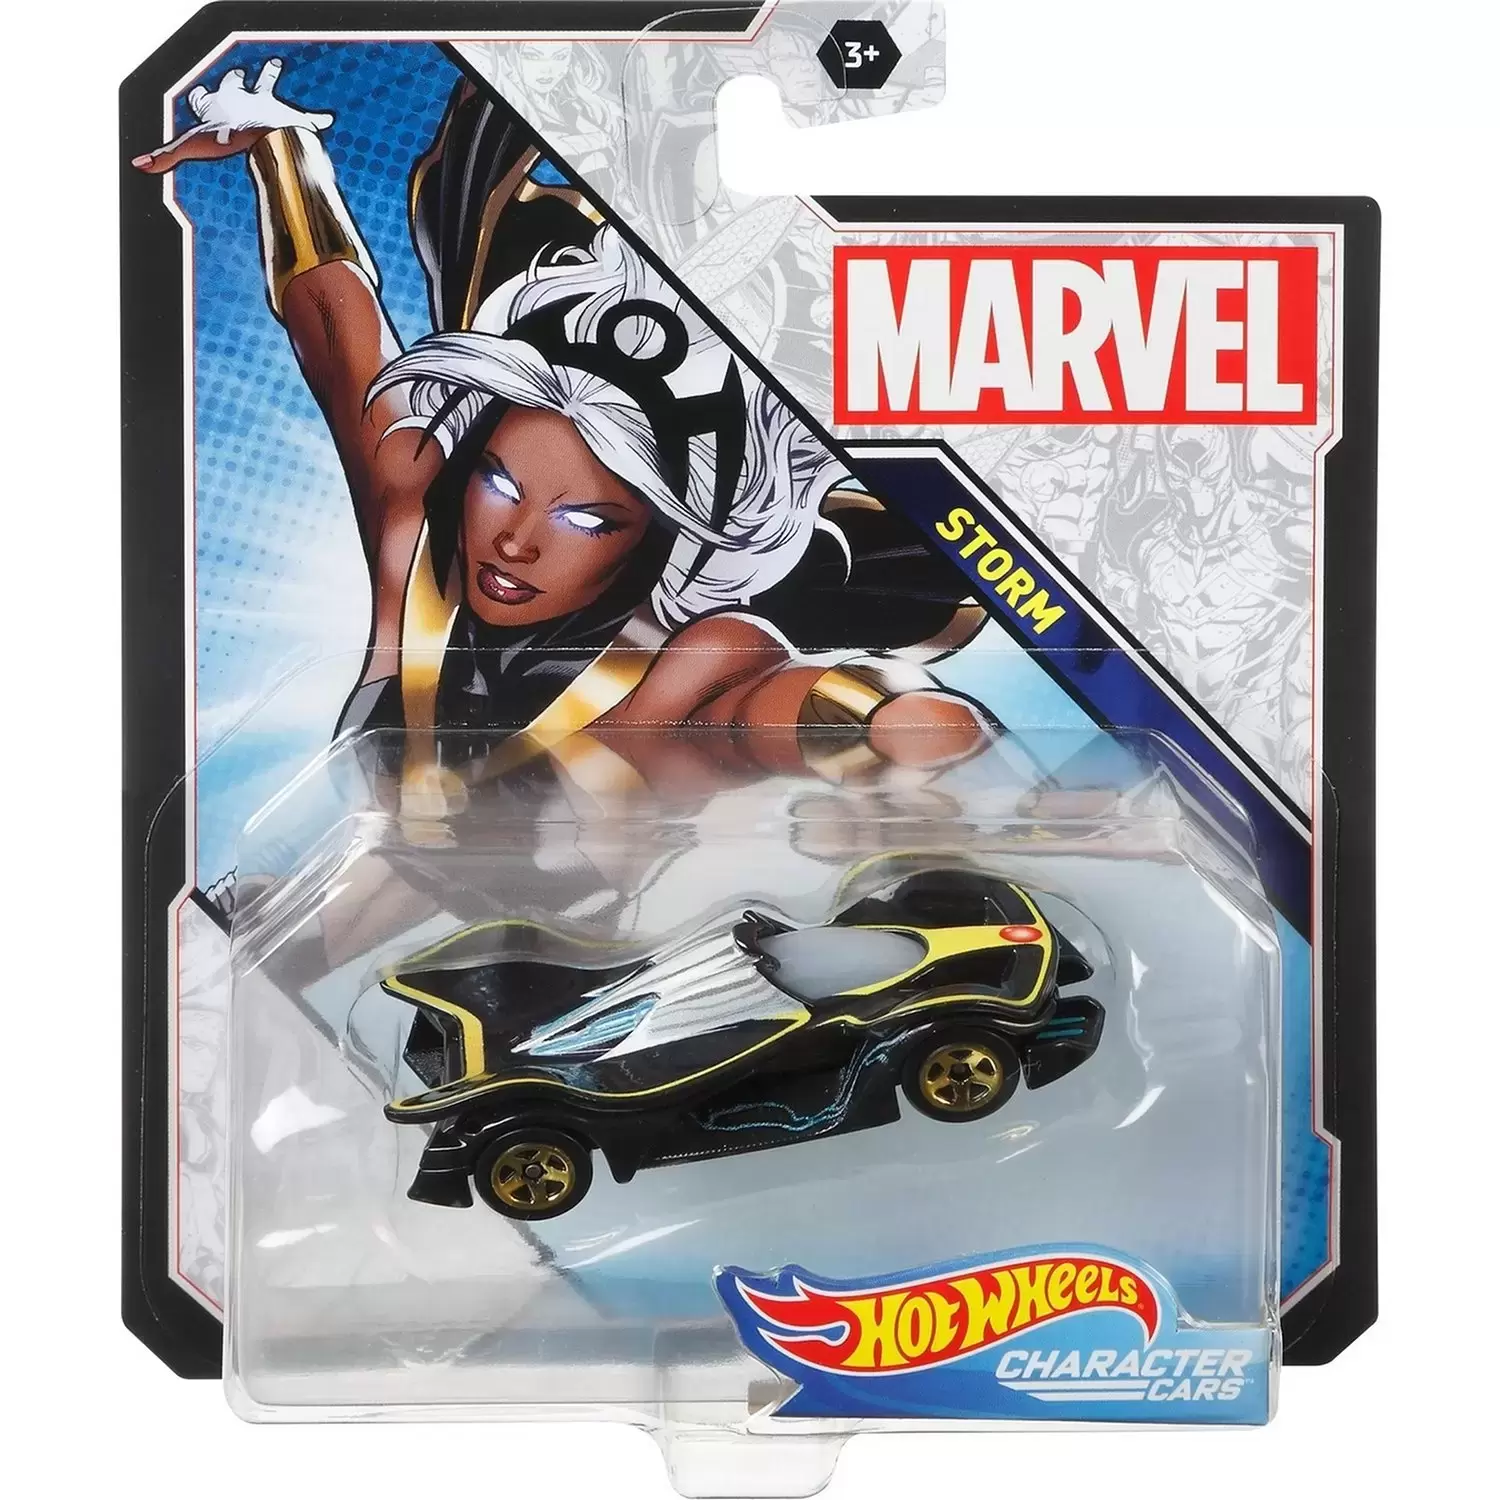 Marvel Character Cars - Storm